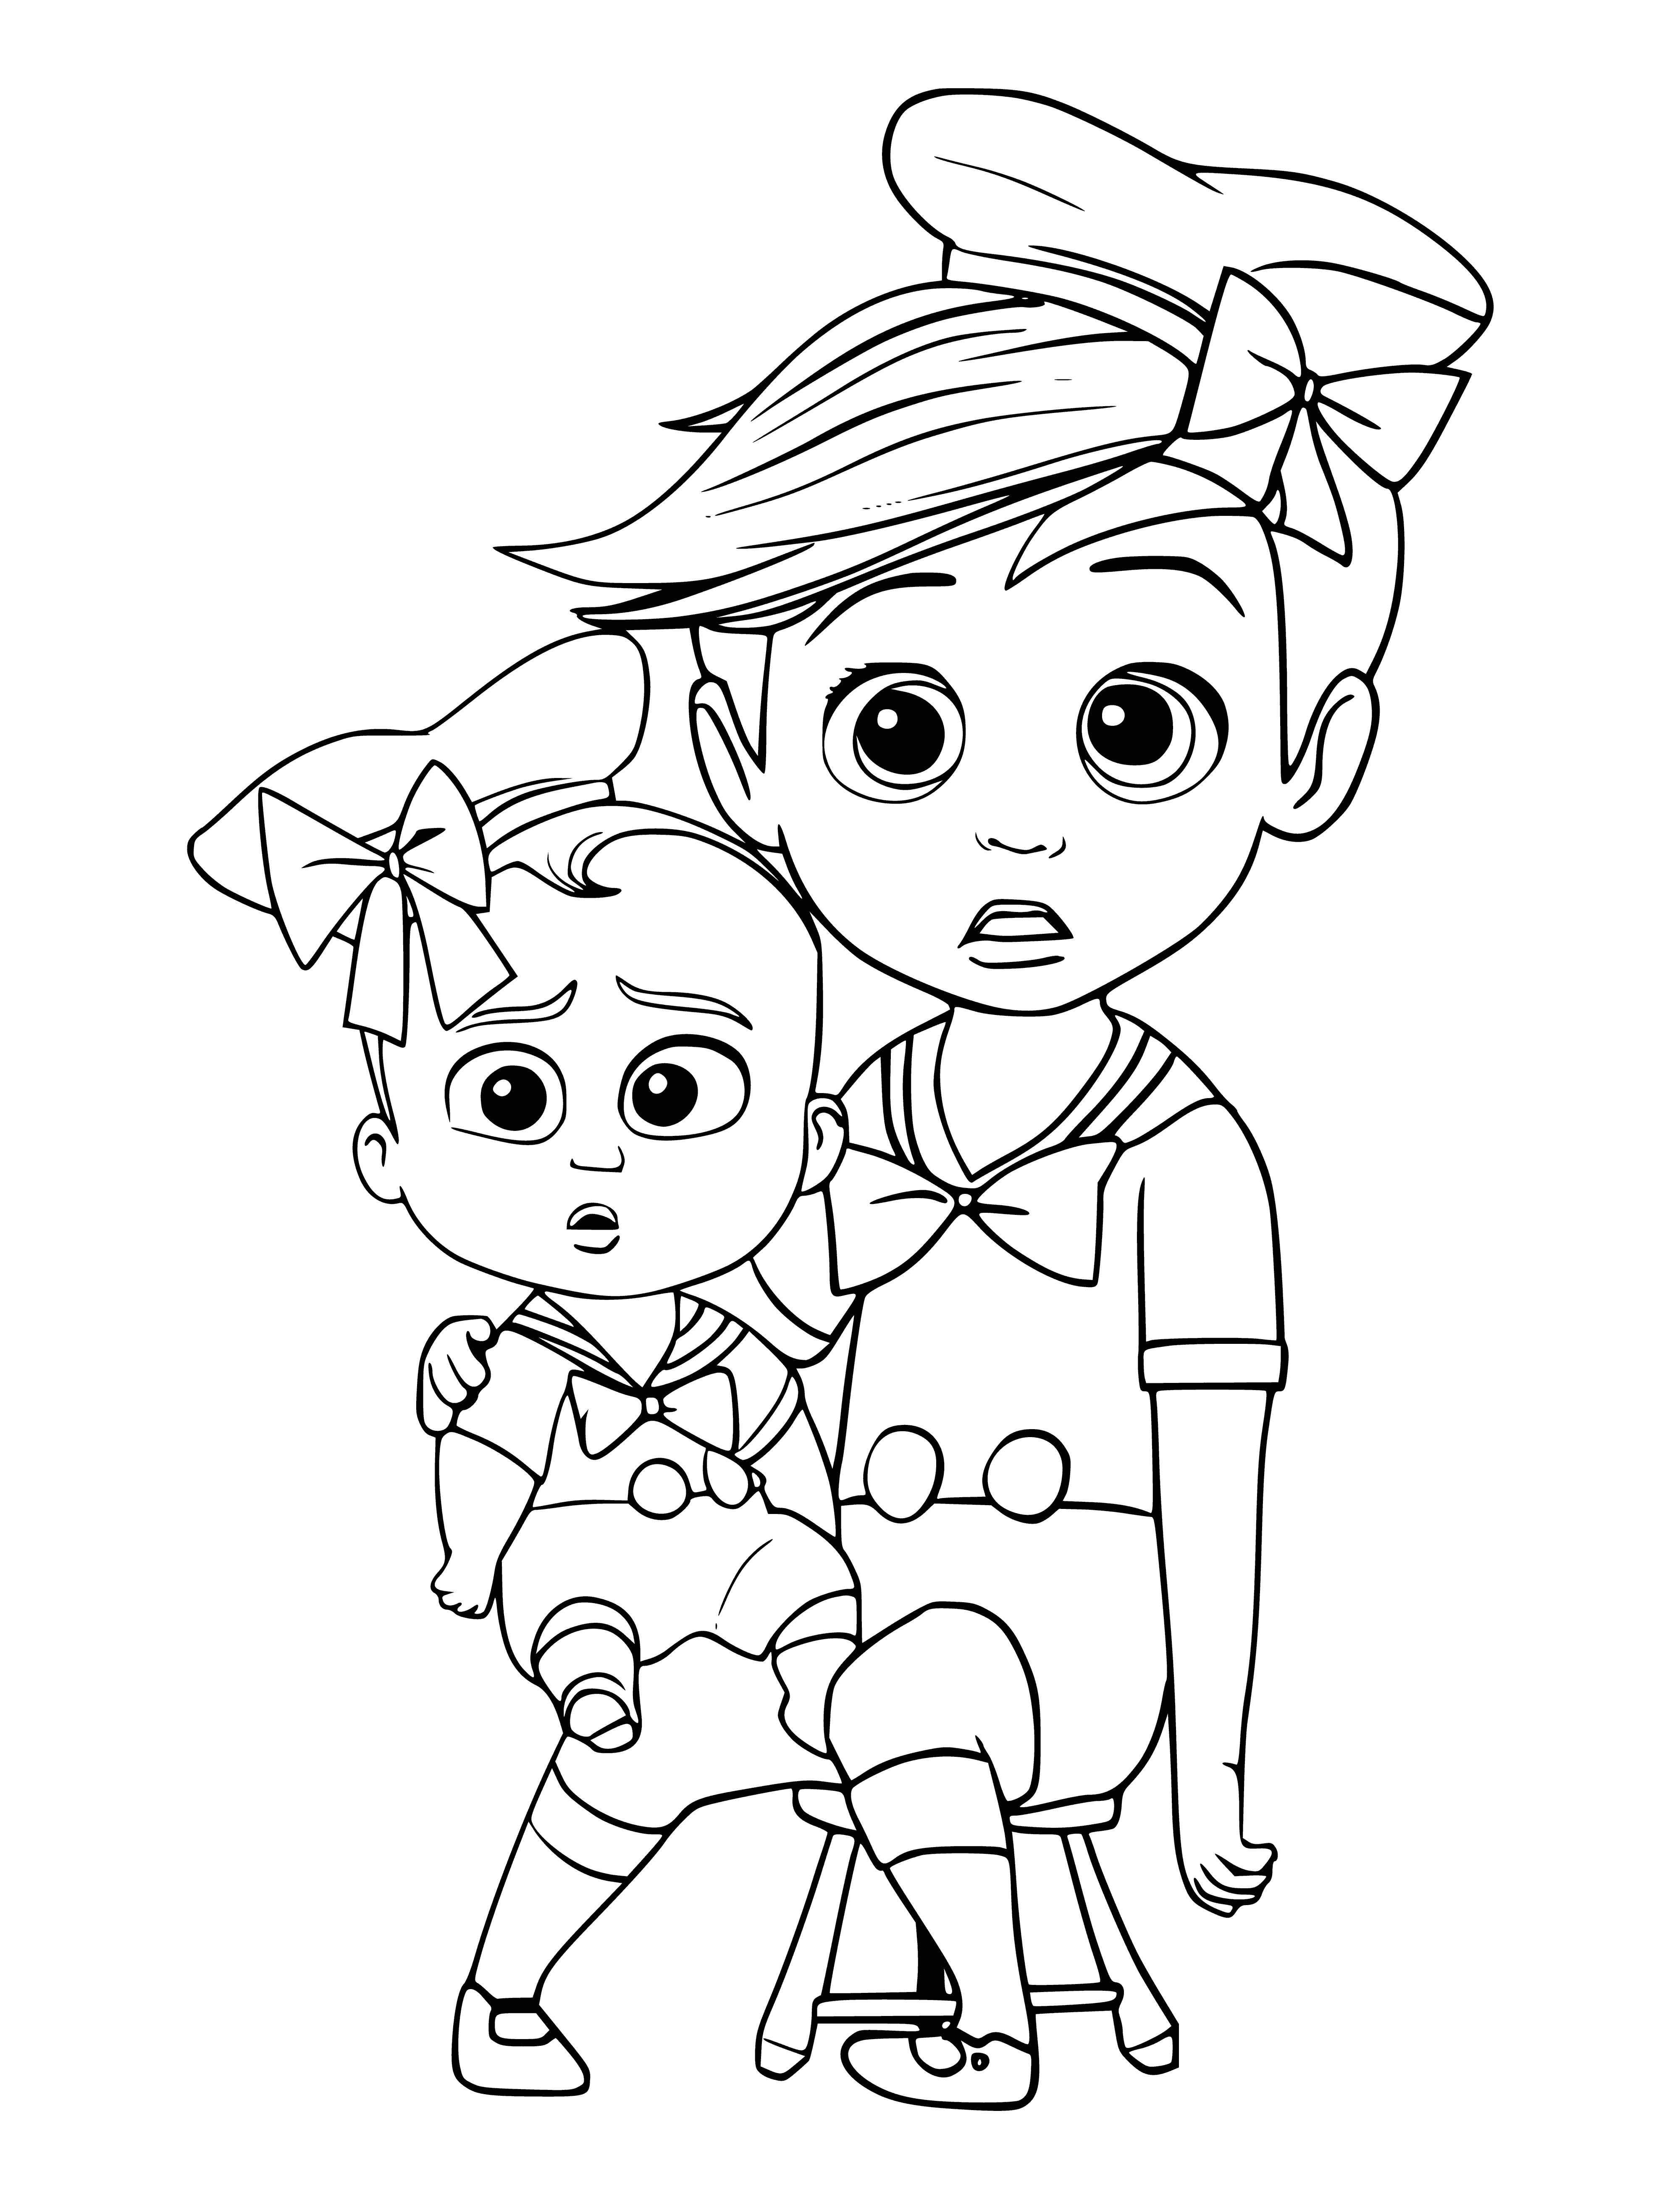 Tim and the Boss Baby coloring page